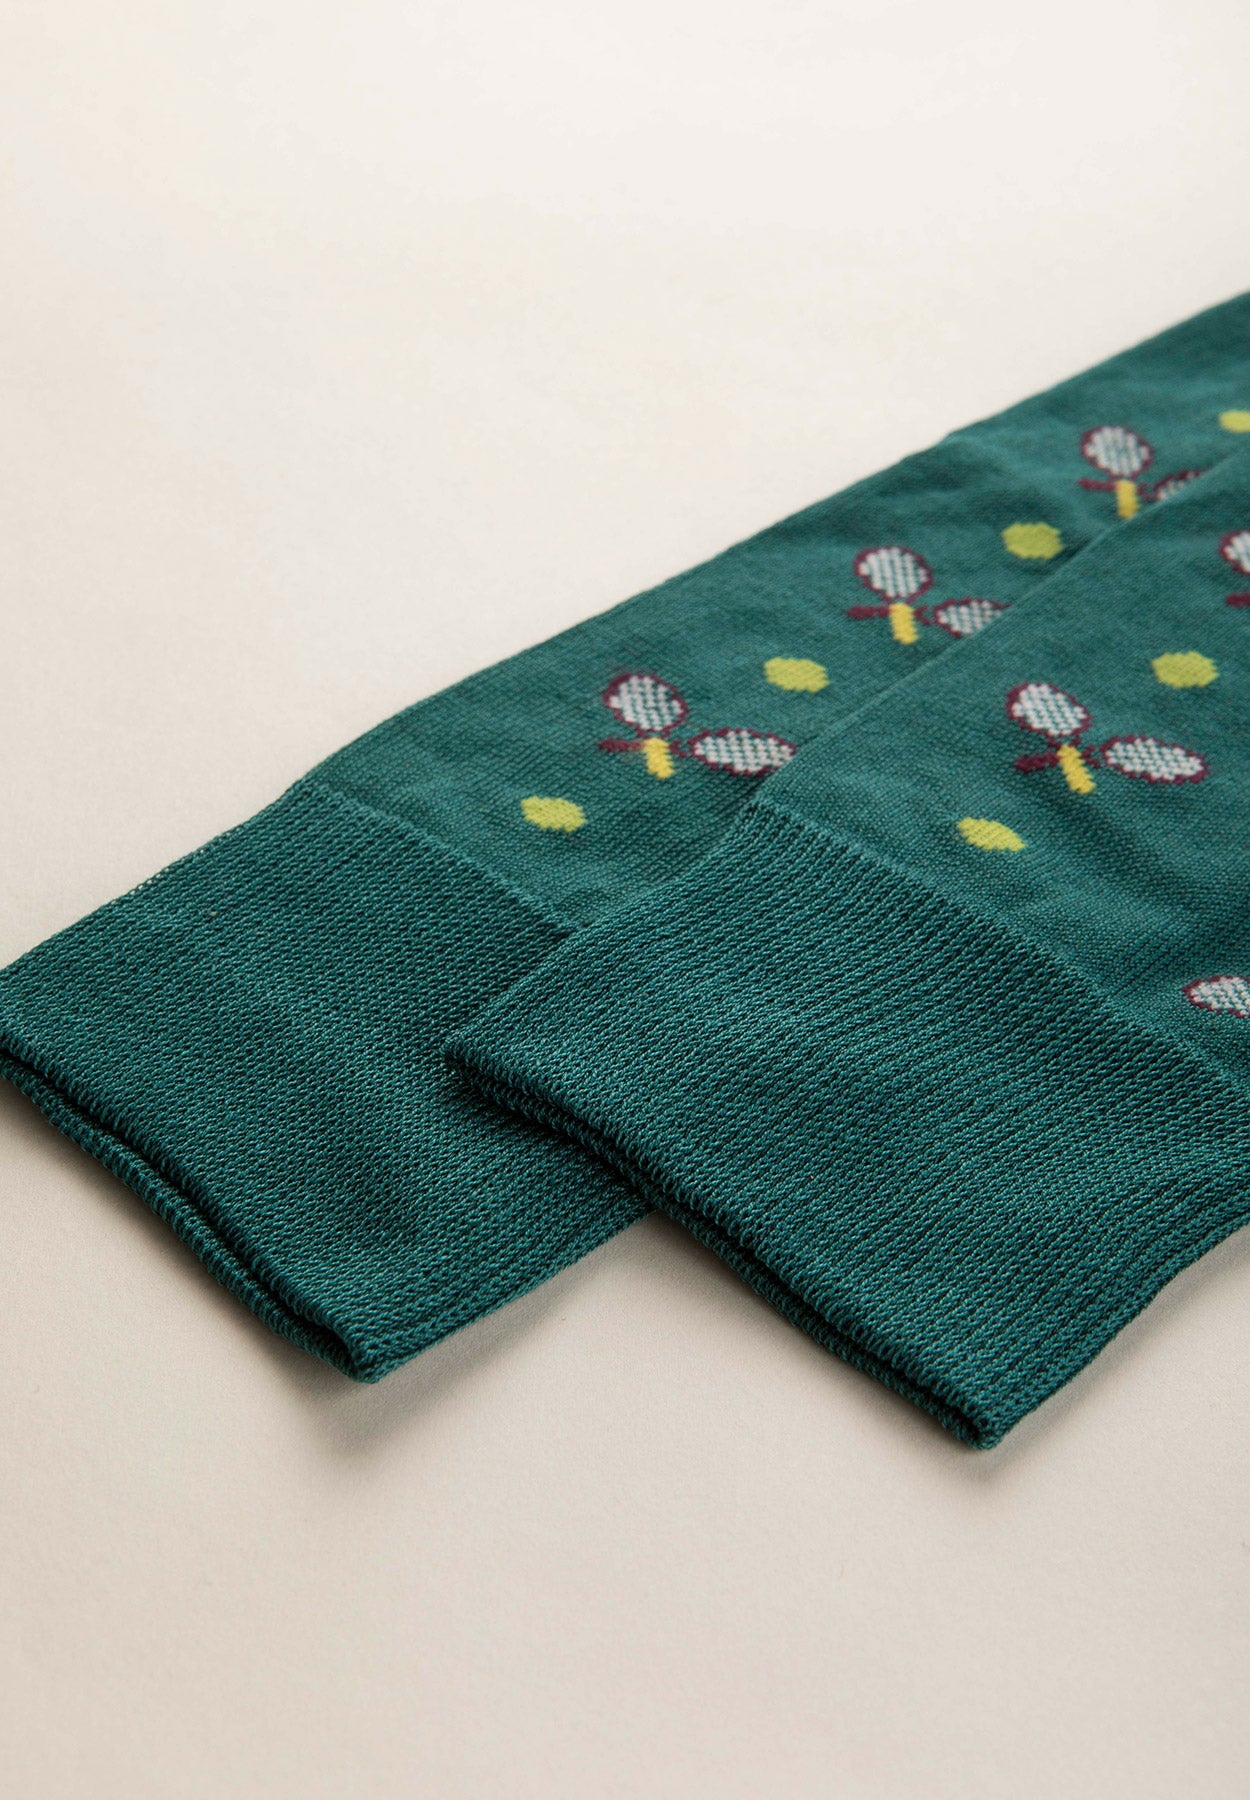 Green stretch cotton socks with tennis pattern